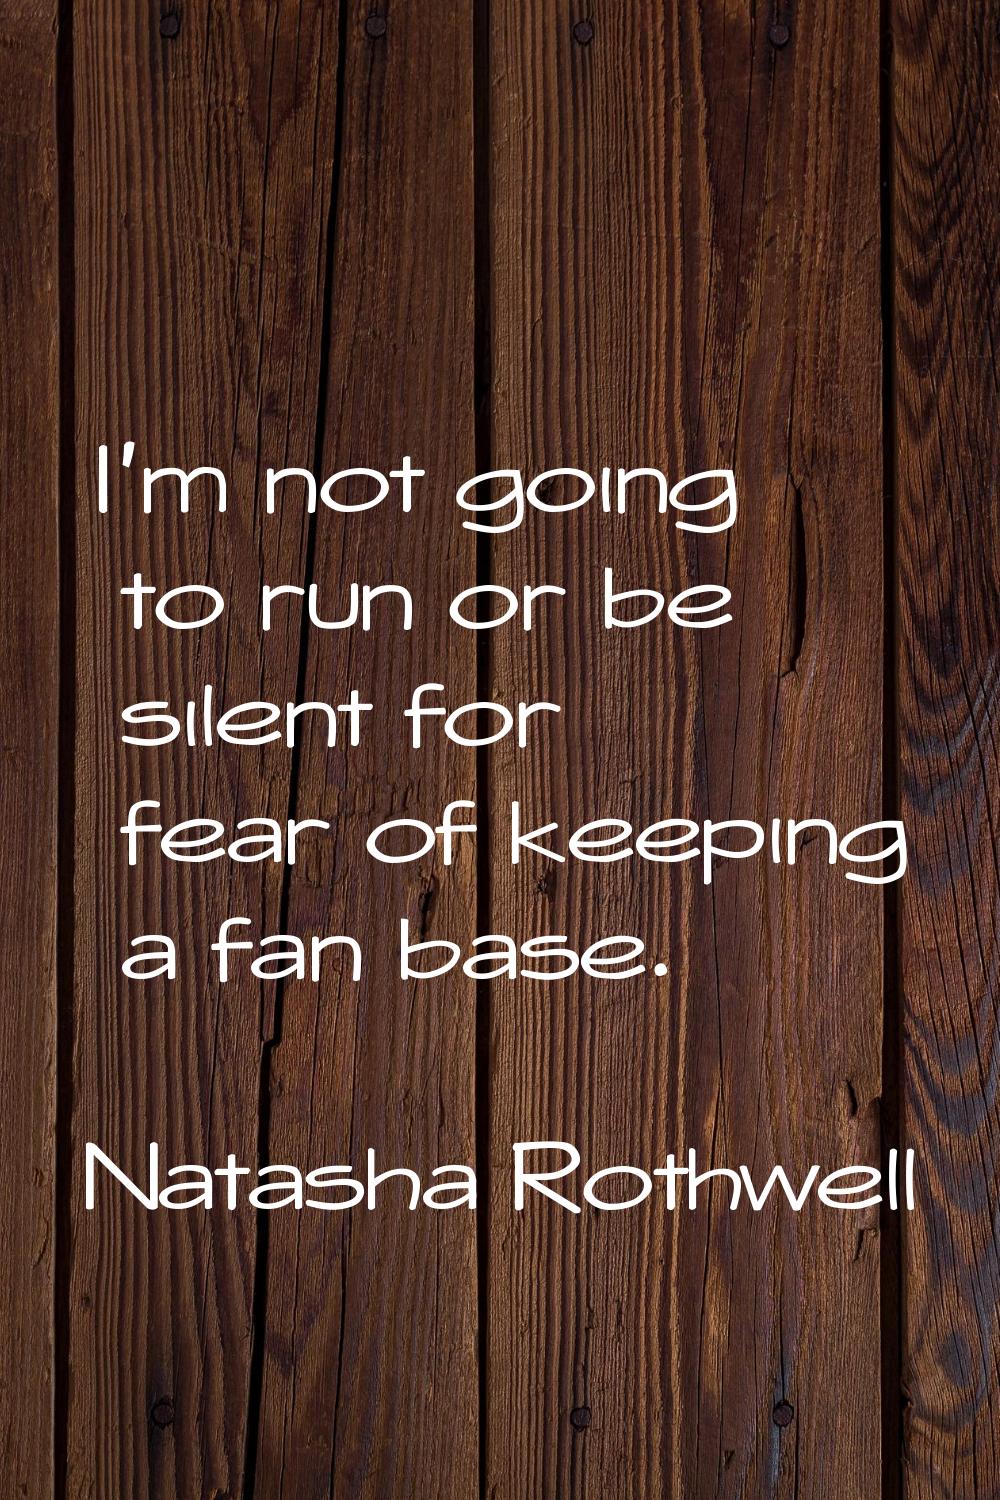 I'm not going to run or be silent for fear of keeping a fan base.